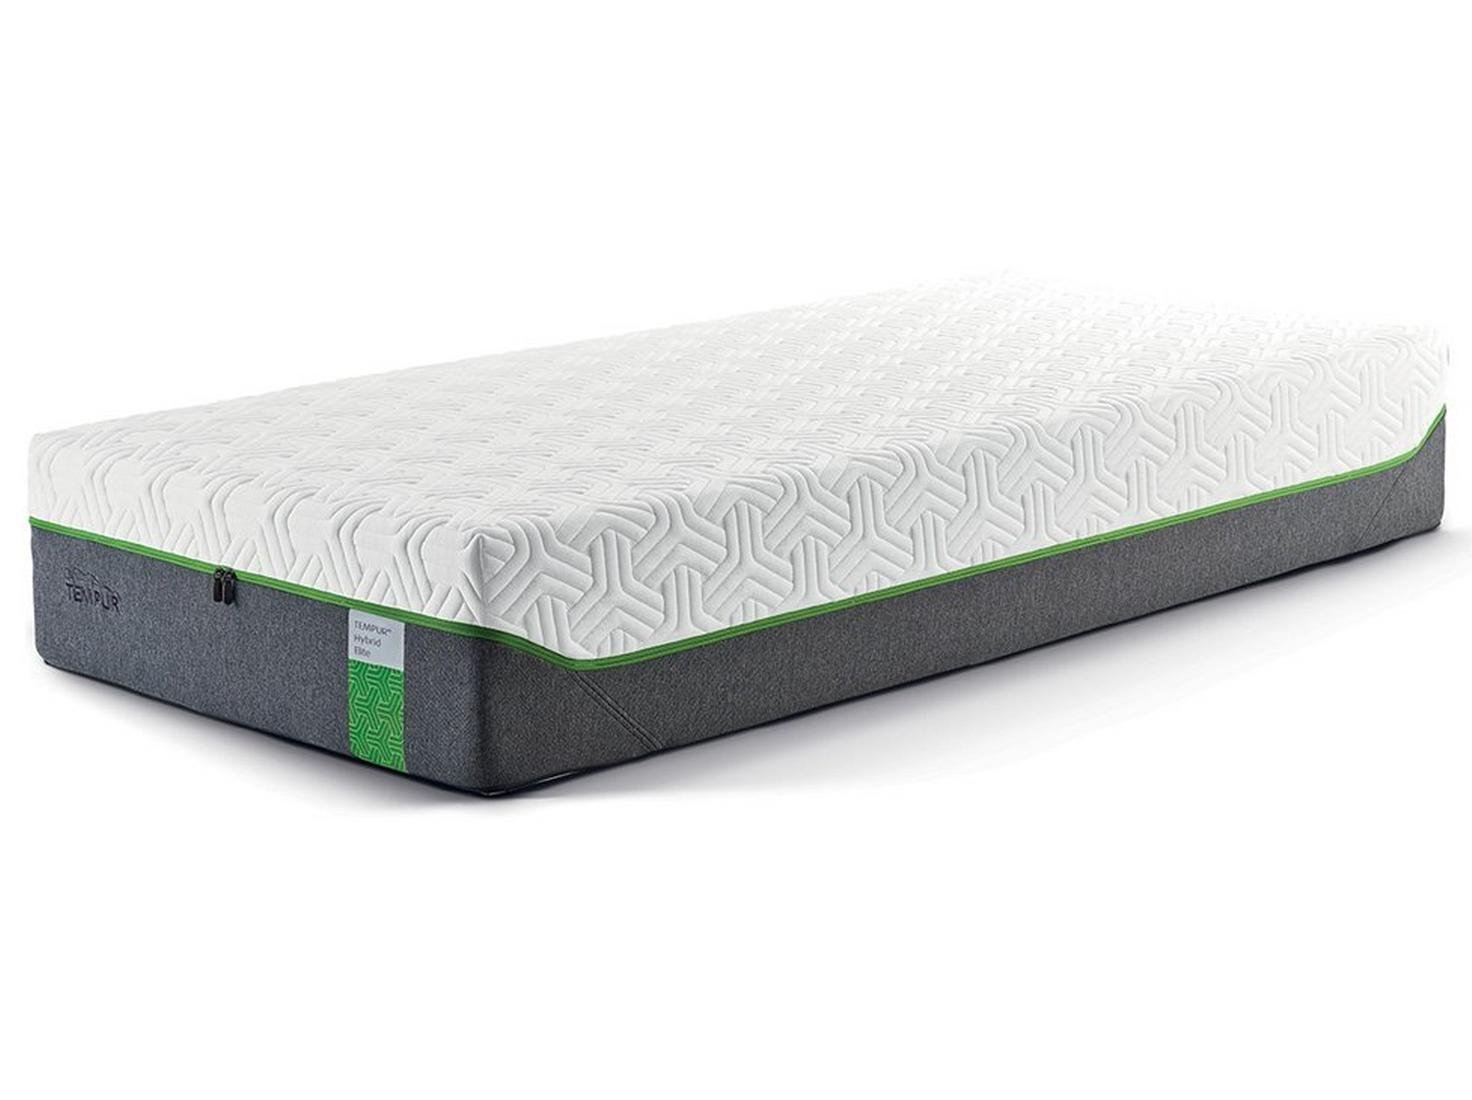 Uncover 73+ Impressive tempur hybrid elite mattress reviews Most Trending, Most Beautiful, And Most Suitable